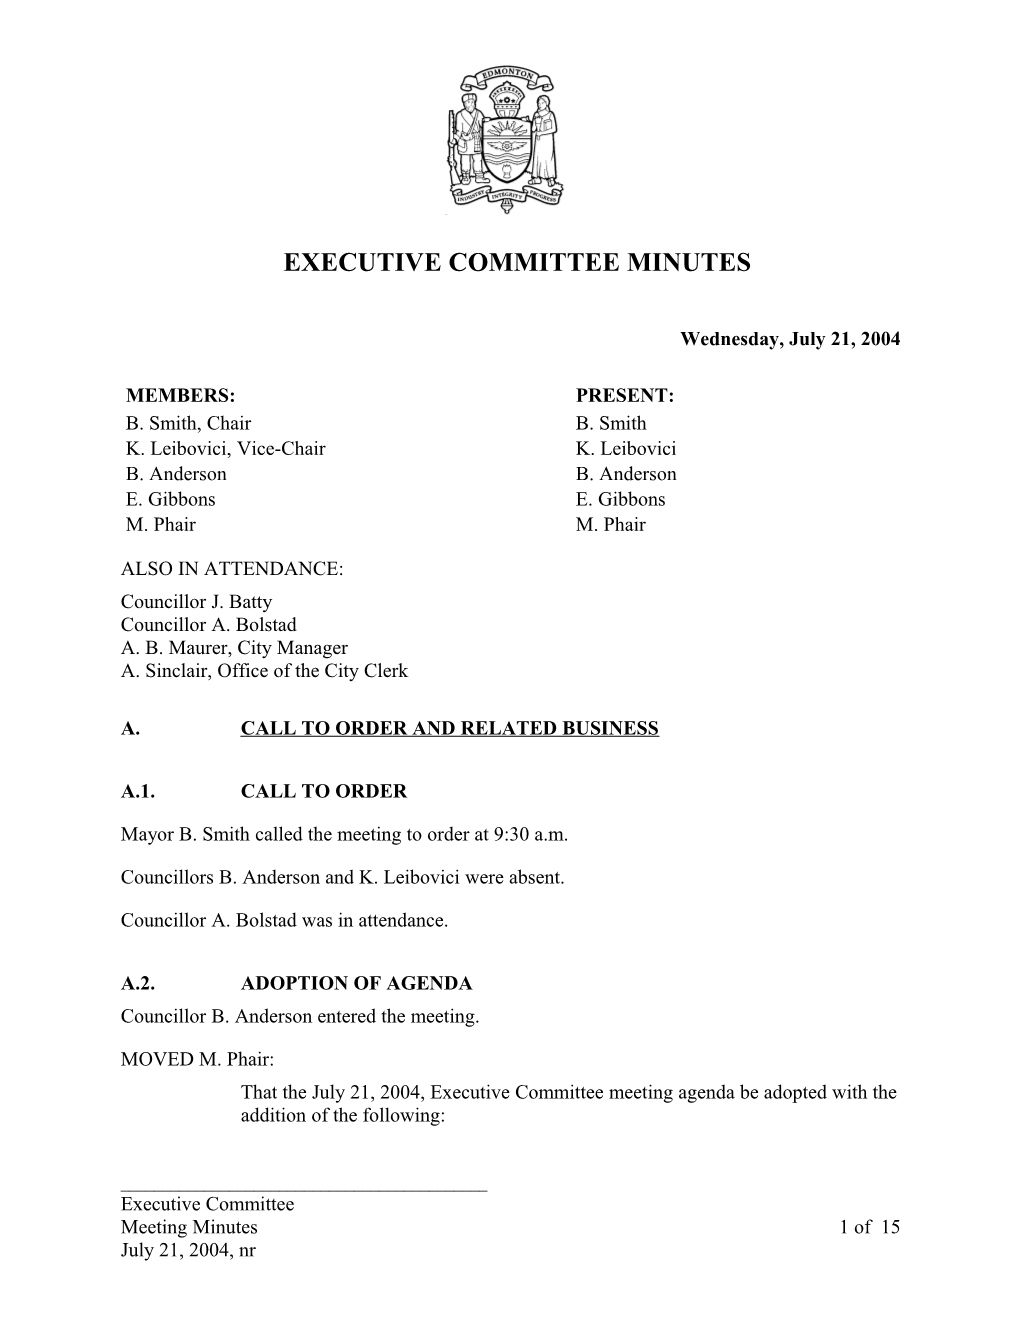 Minutes for Executive Committee July 21, 2004 Meeting